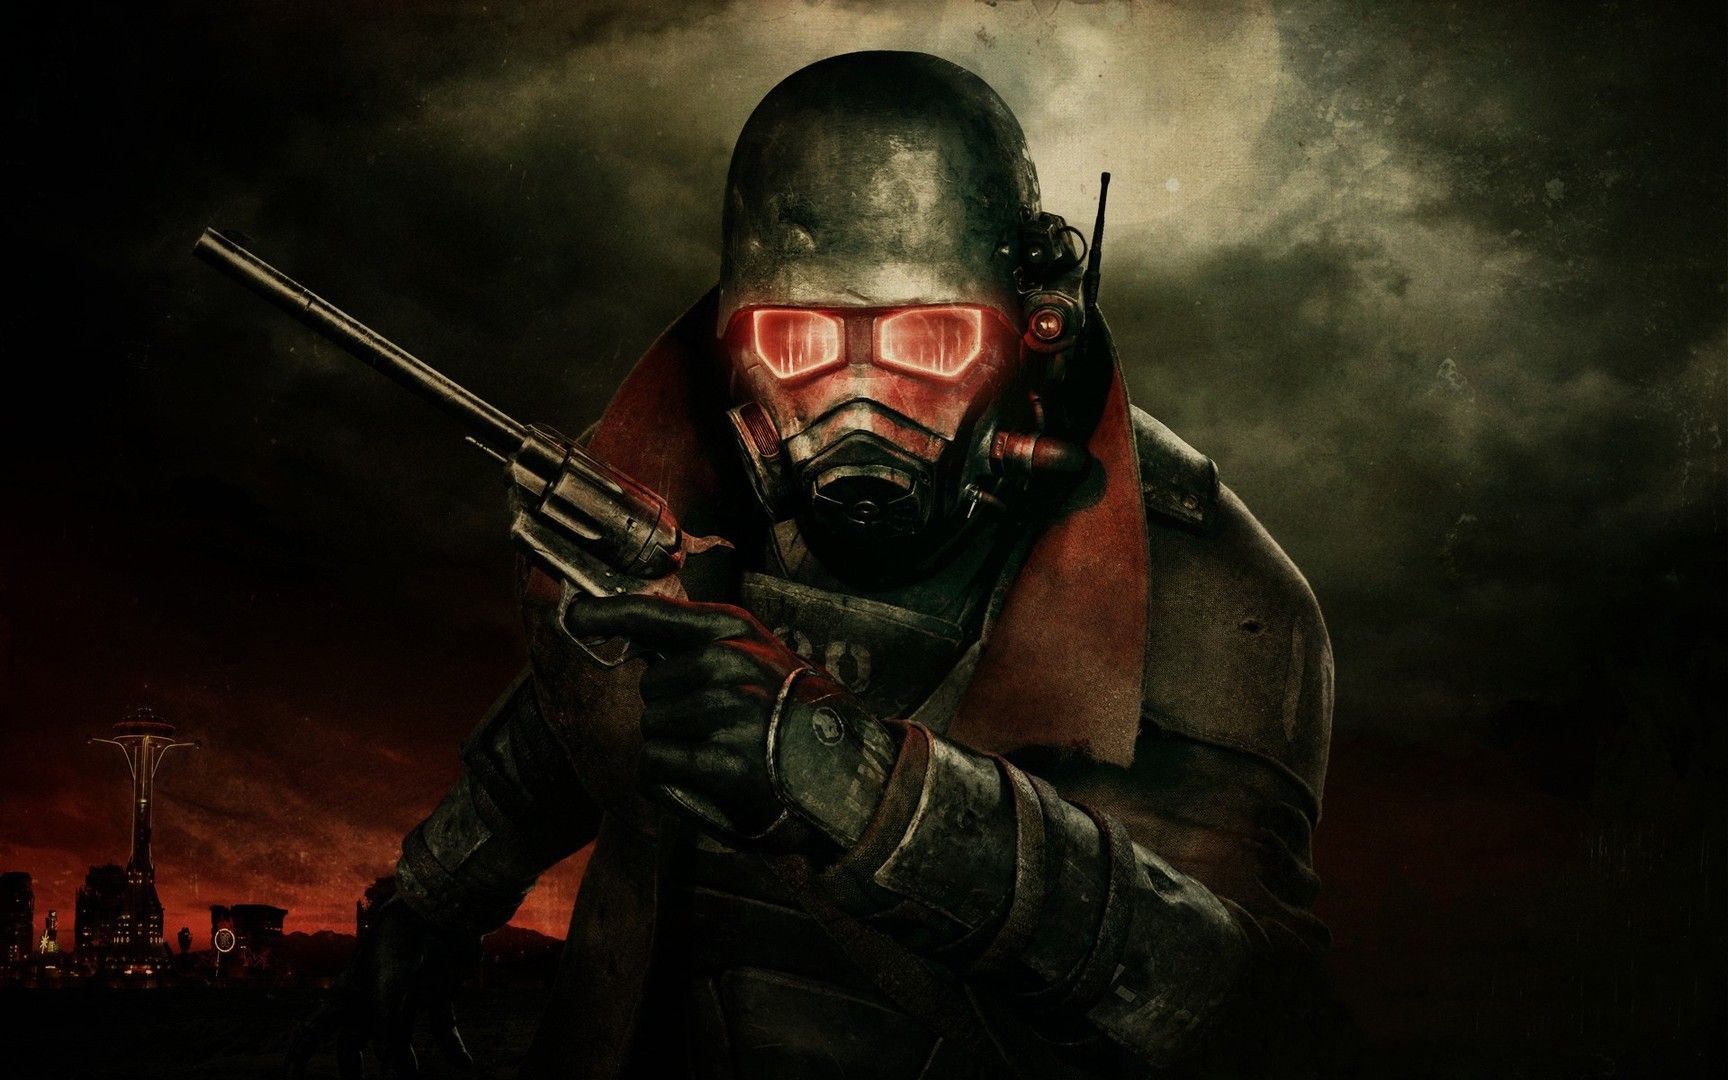 Fallout: New Vegas Wallpapers